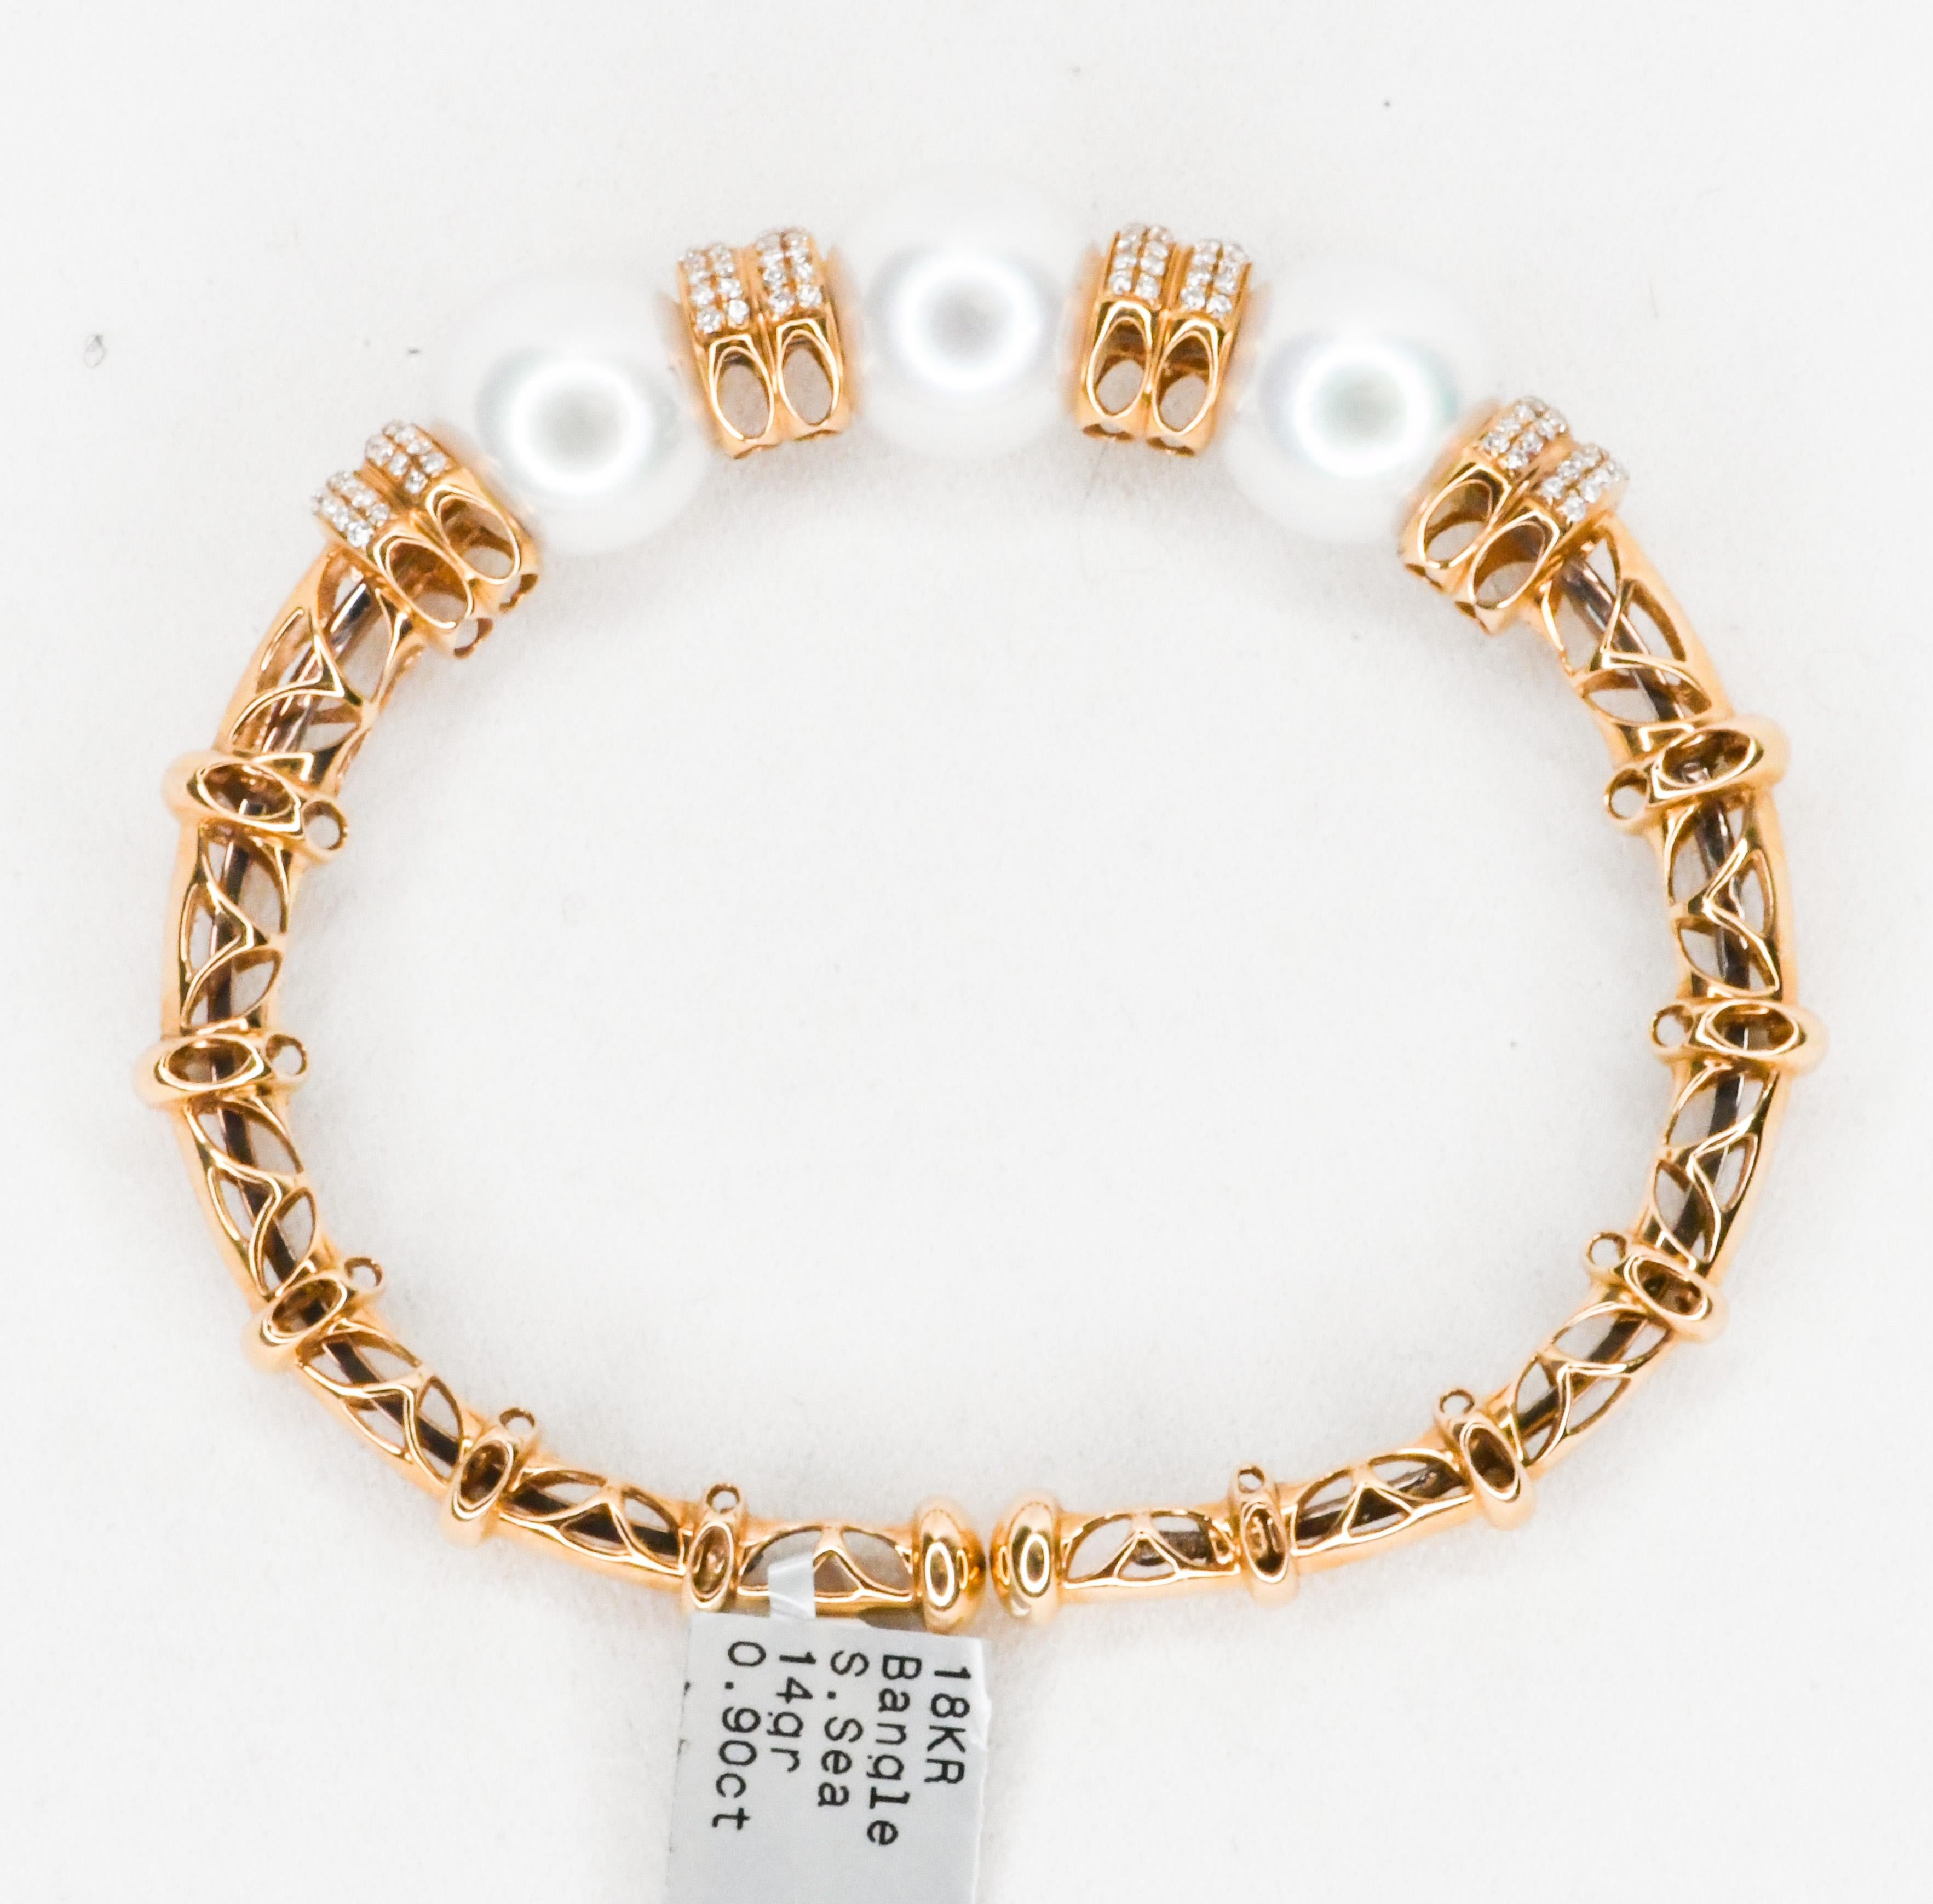 The warmth of 18 karat Rose Gold goes with all skin tones.  This stunning bracelet is so easy to put on or take off.  Very flexible open ends.  Adorned with three white and lustrous South Sea pearls measuring 14mm.  Pearls are flanked and separated